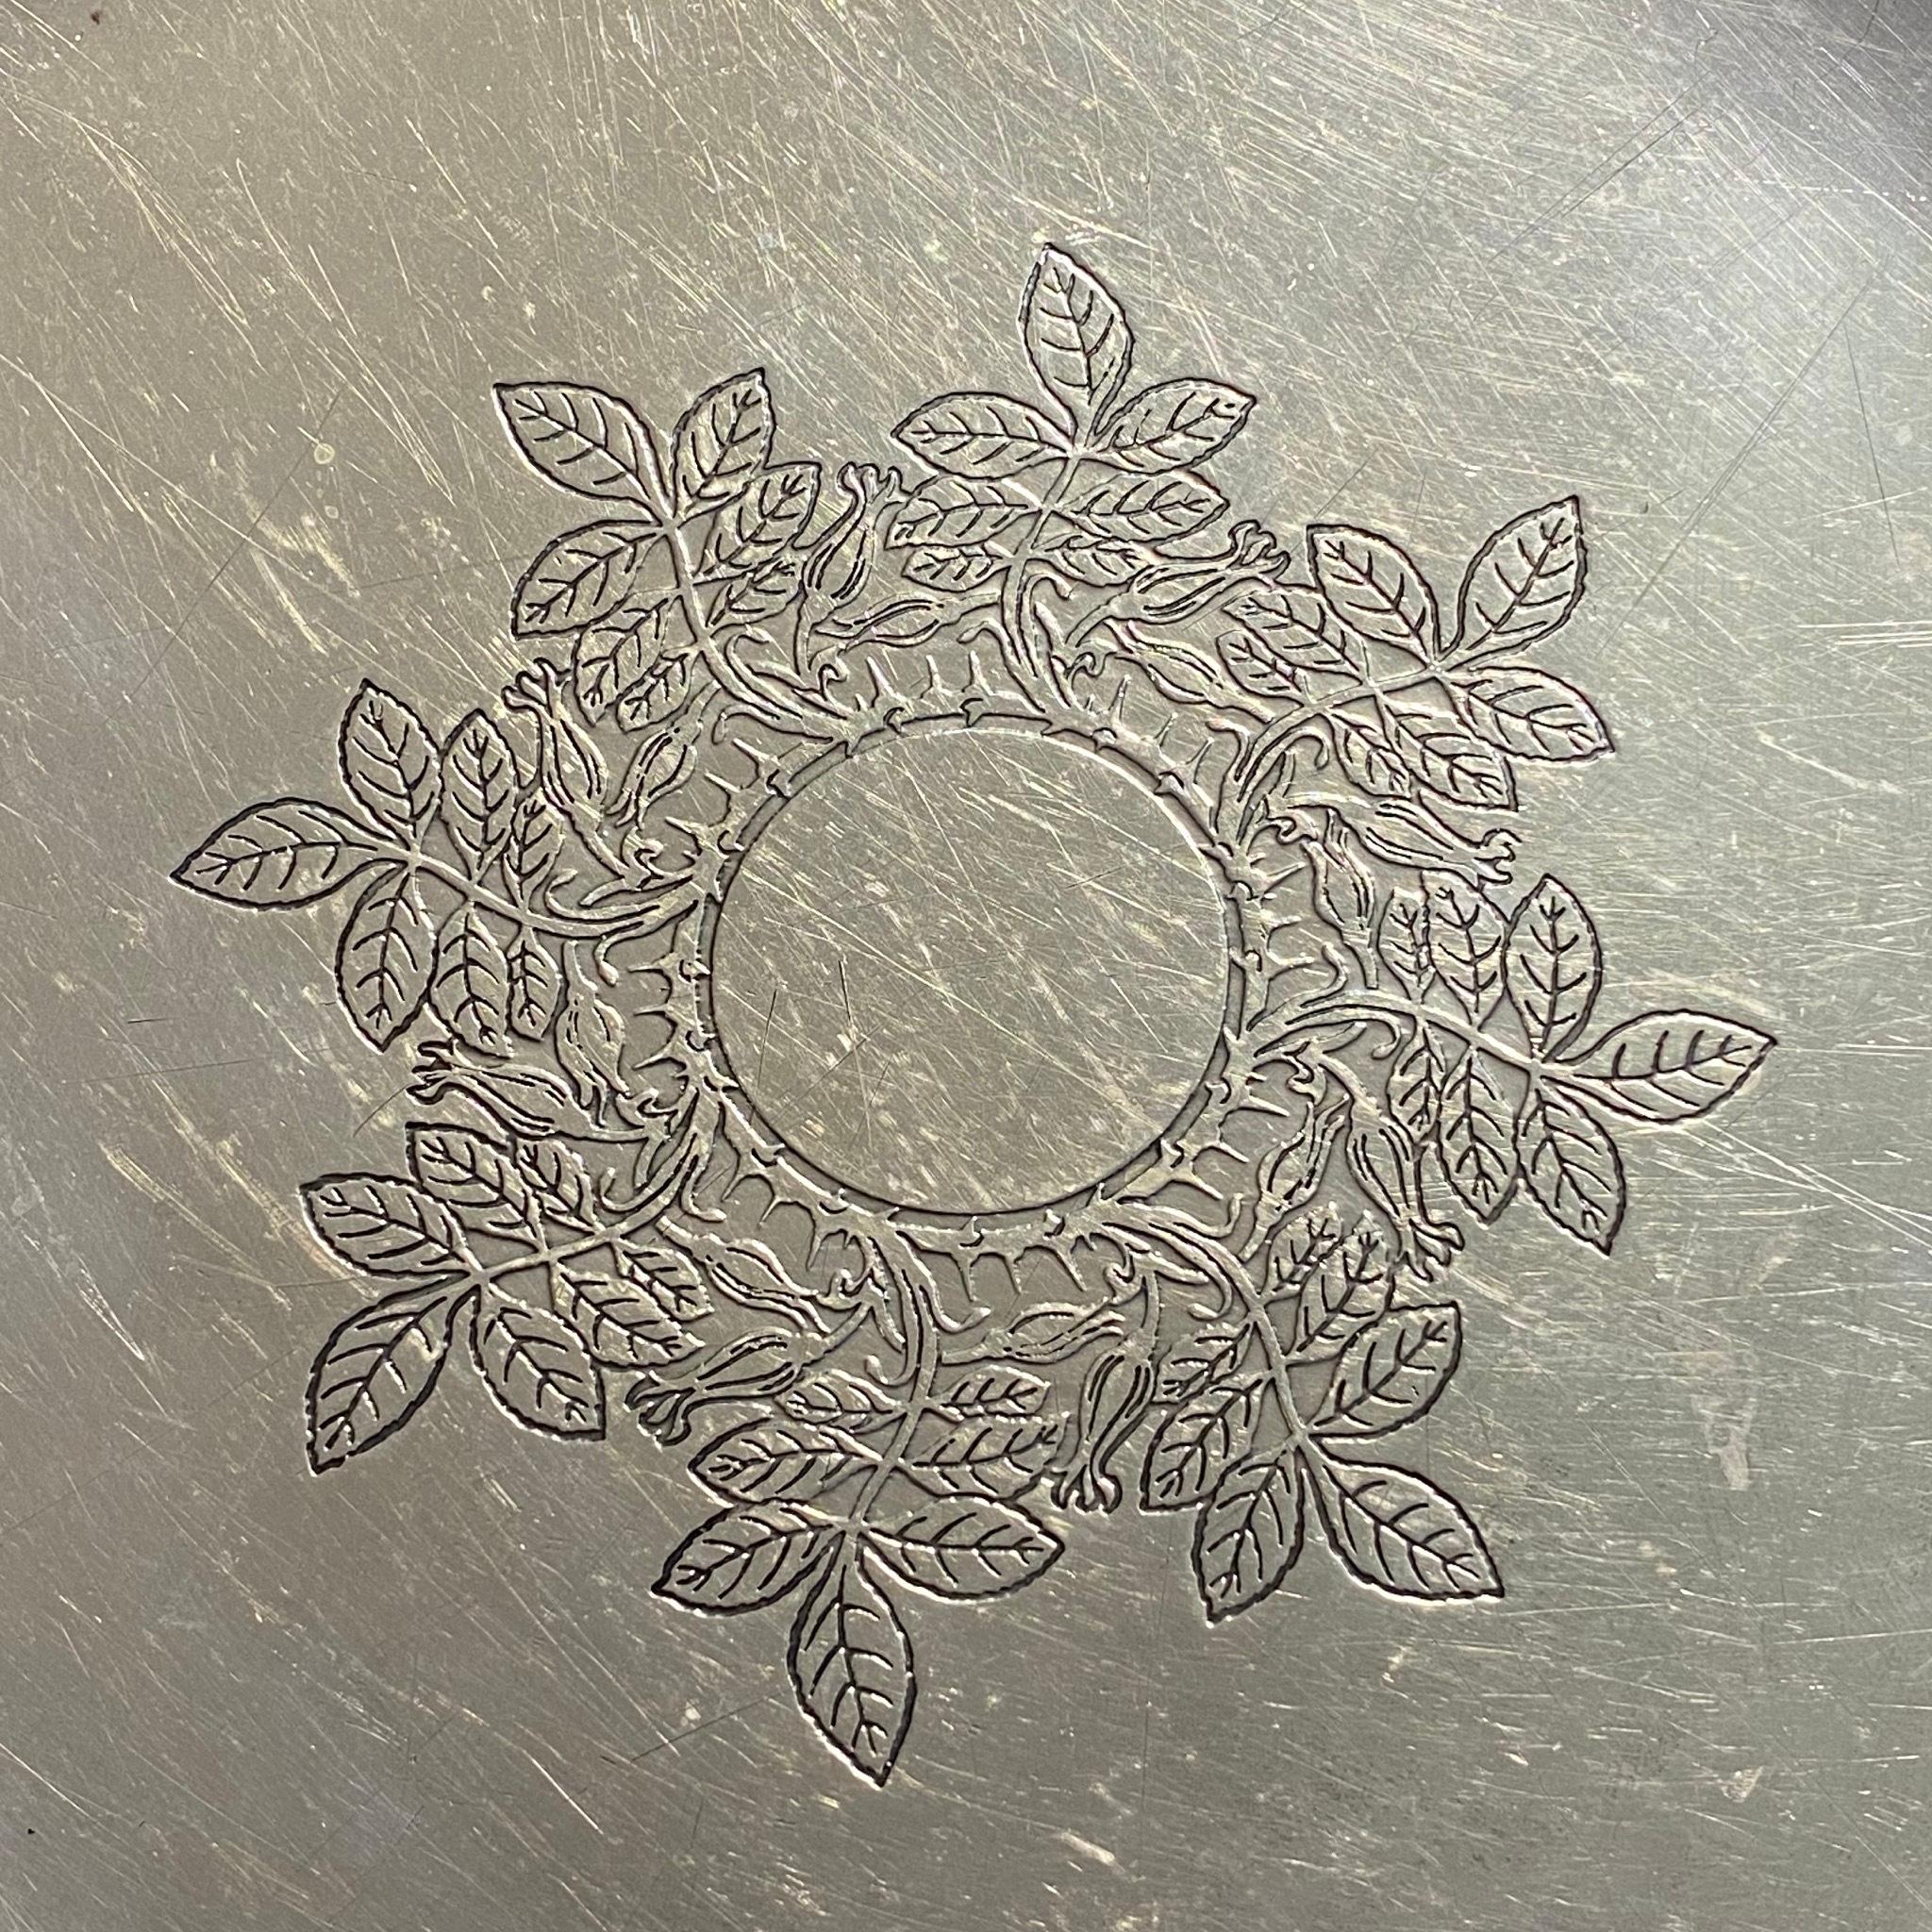 Tiffany & Co. sterling silver serving platter. Center engraved with a floral leaf wreath design. Measuring approximate: 12